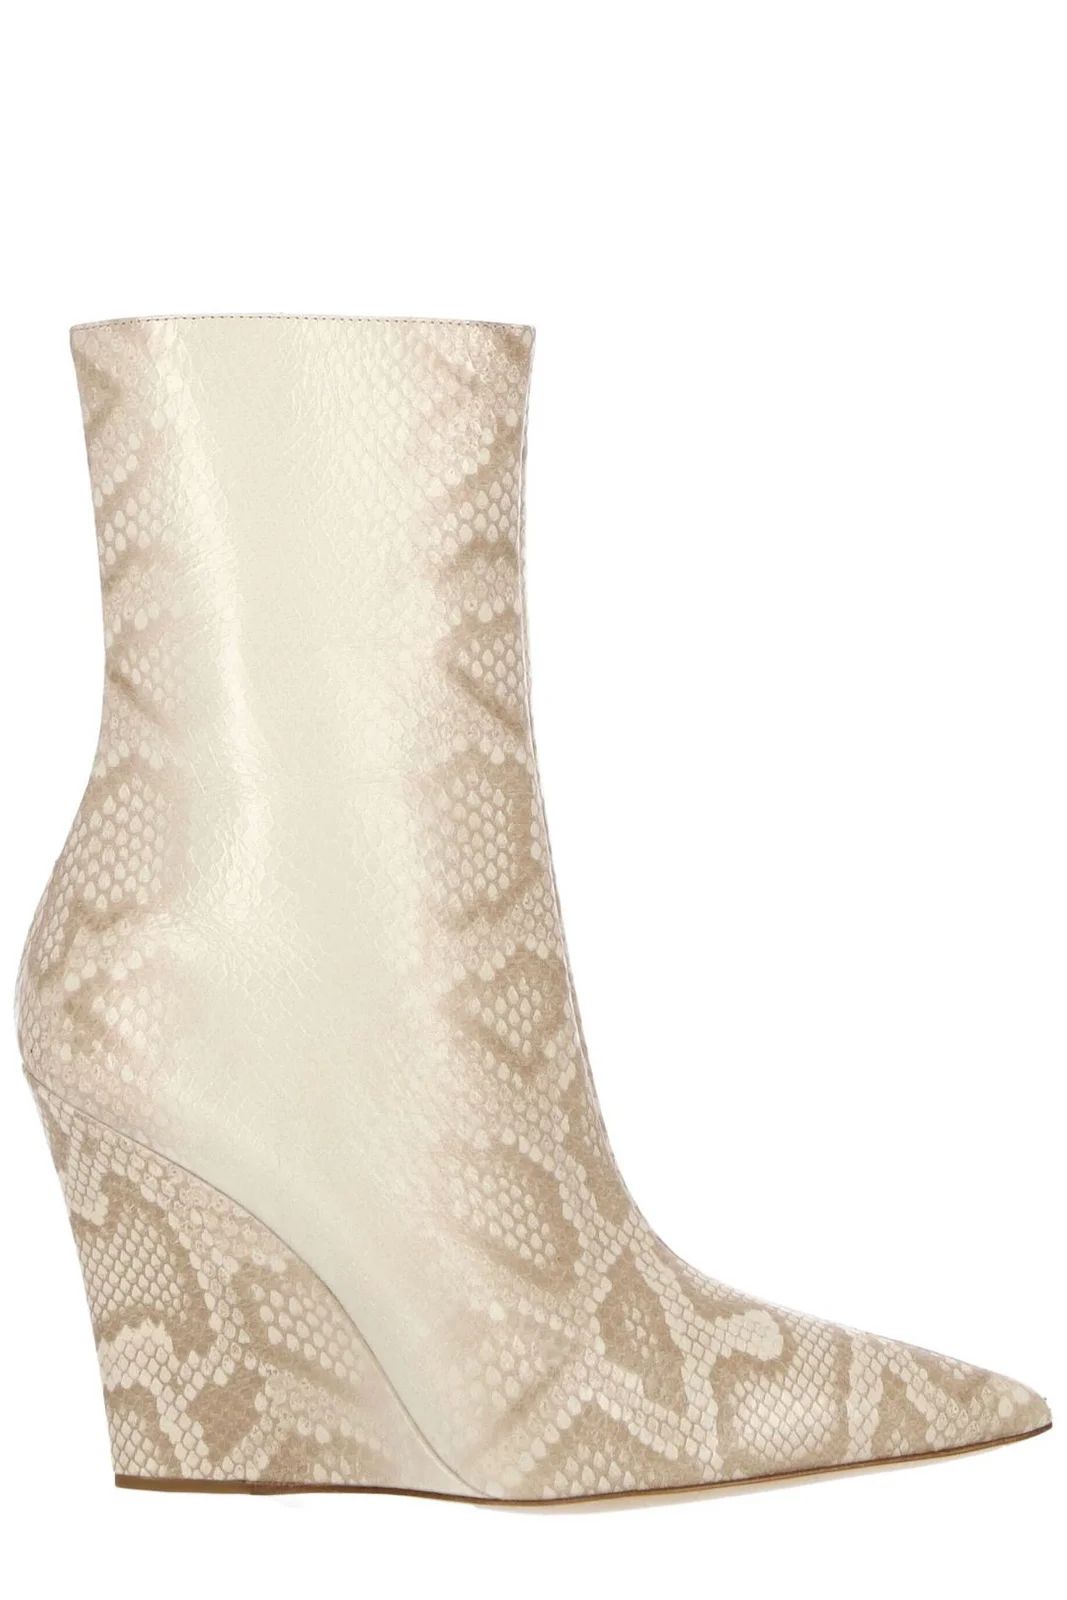 Paris Texas Python Printed Pointed-Toe Boots | Cettire Global